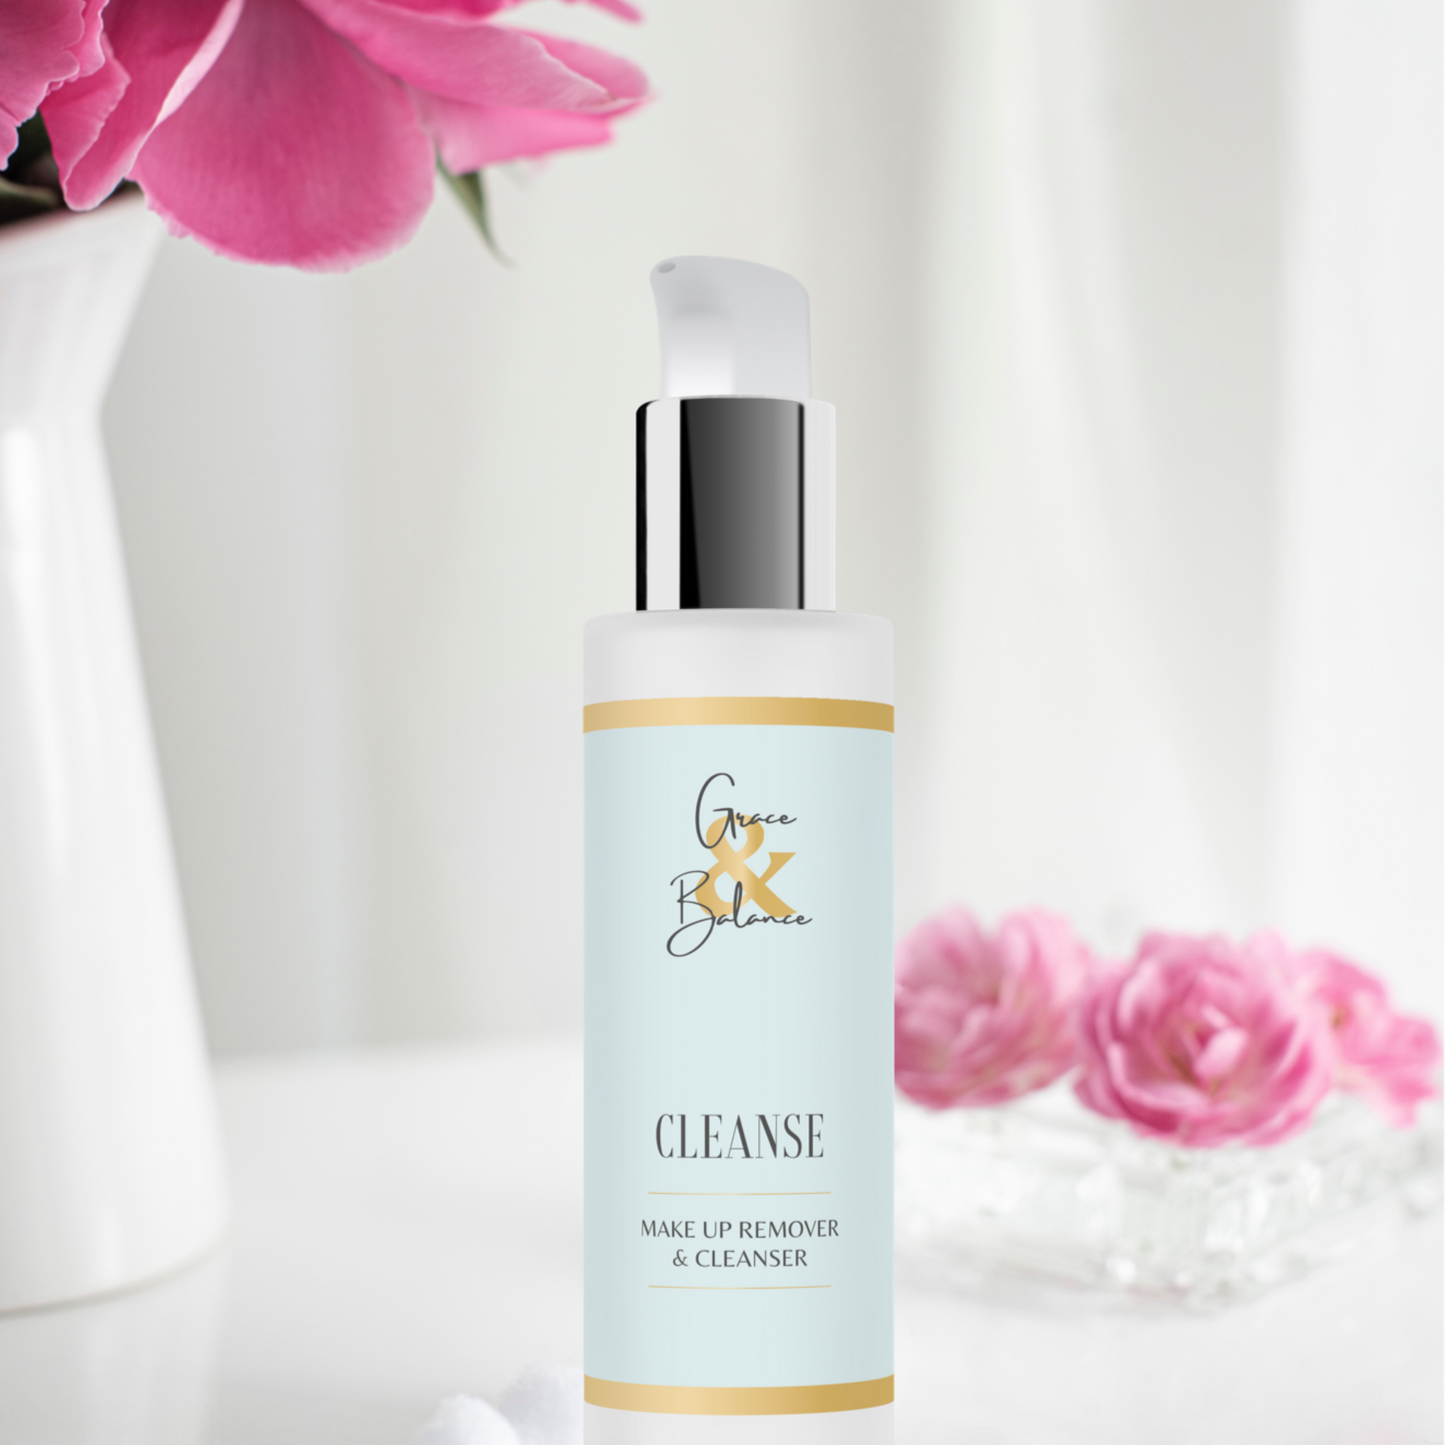 CLEANSE - Make Up Remover & Cleanser